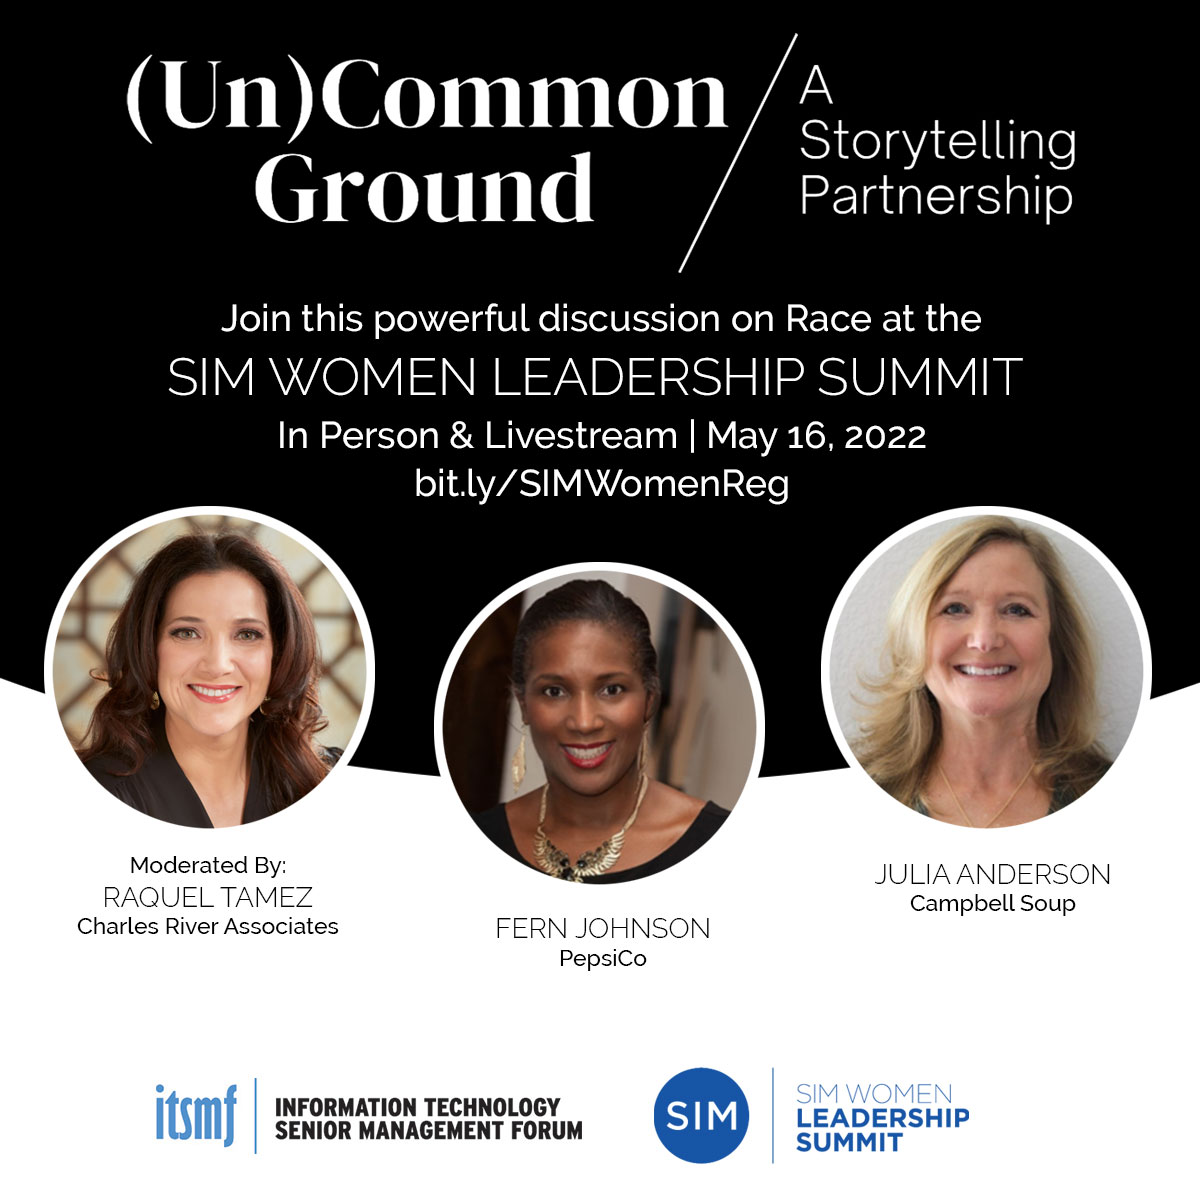 On May 16, I’ll be moderating a discussion on race in the workplace as part of #SIMWomenLeadershipSummit “(Un)common Ground” series. I can’t wait to sit down with my fellow women leaders to discuss what we can learn from one another as we continue to level the playing field.